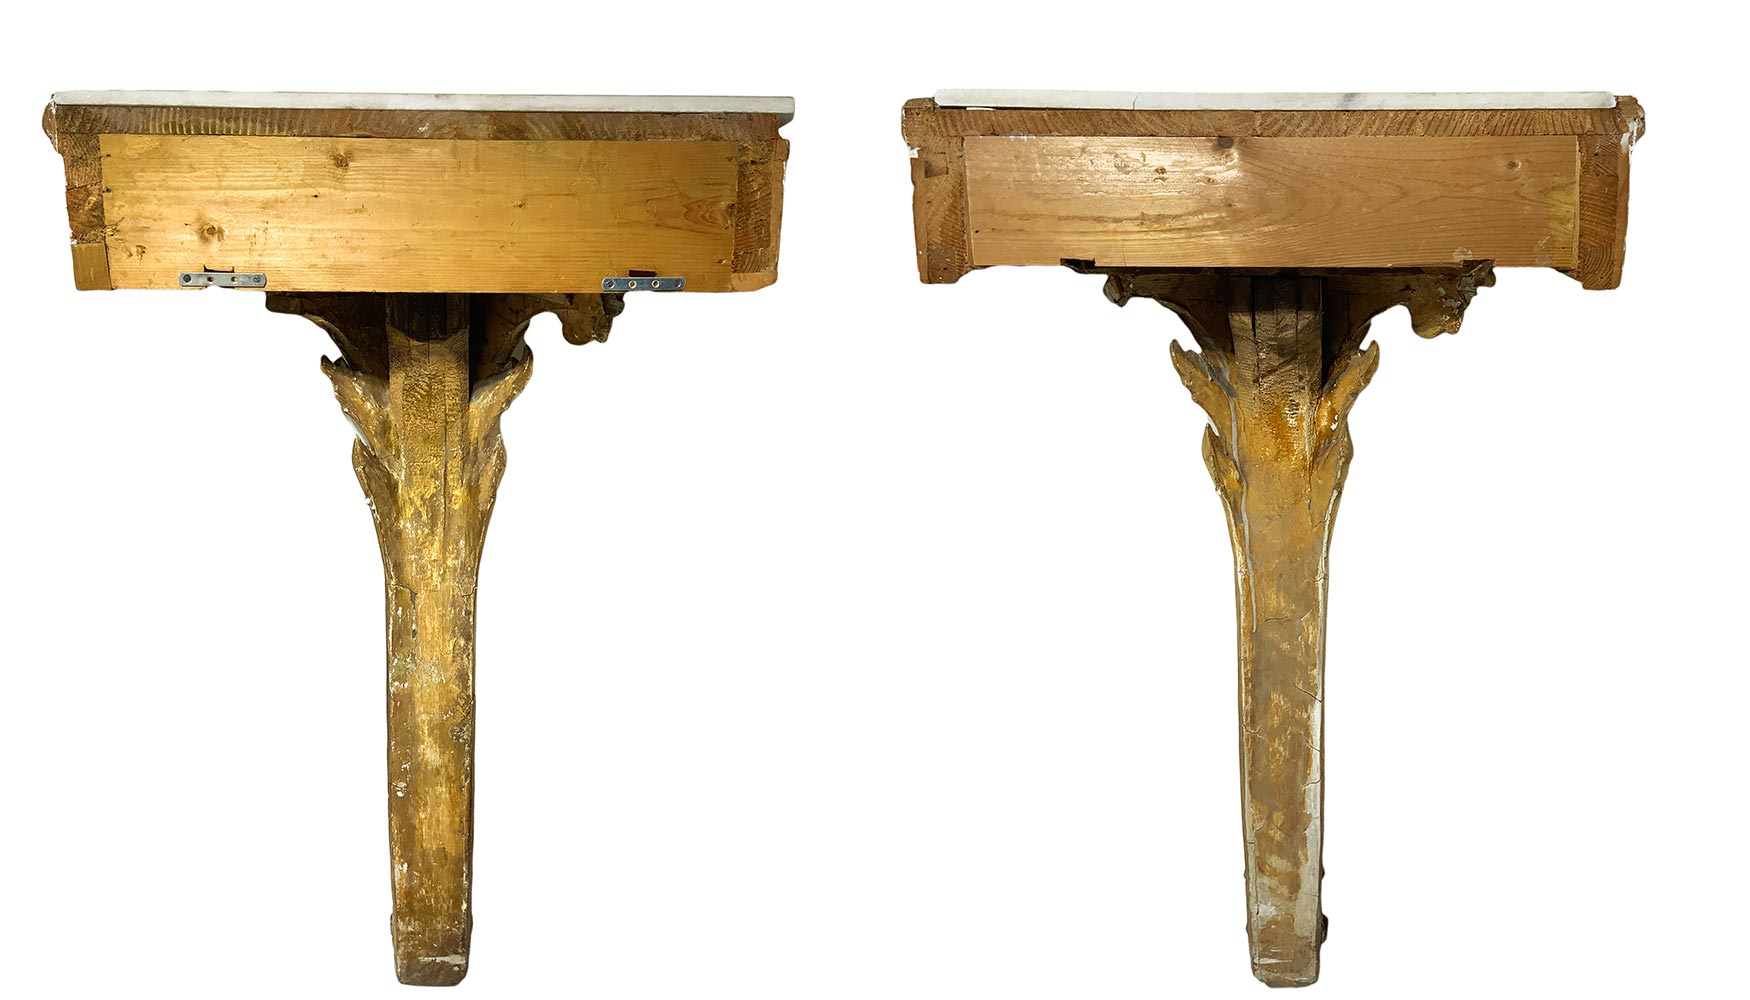 Pair of lacquered and gilded wood console, late XVIII/early 19th century, Sicily. White marble on - Image 8 of 8